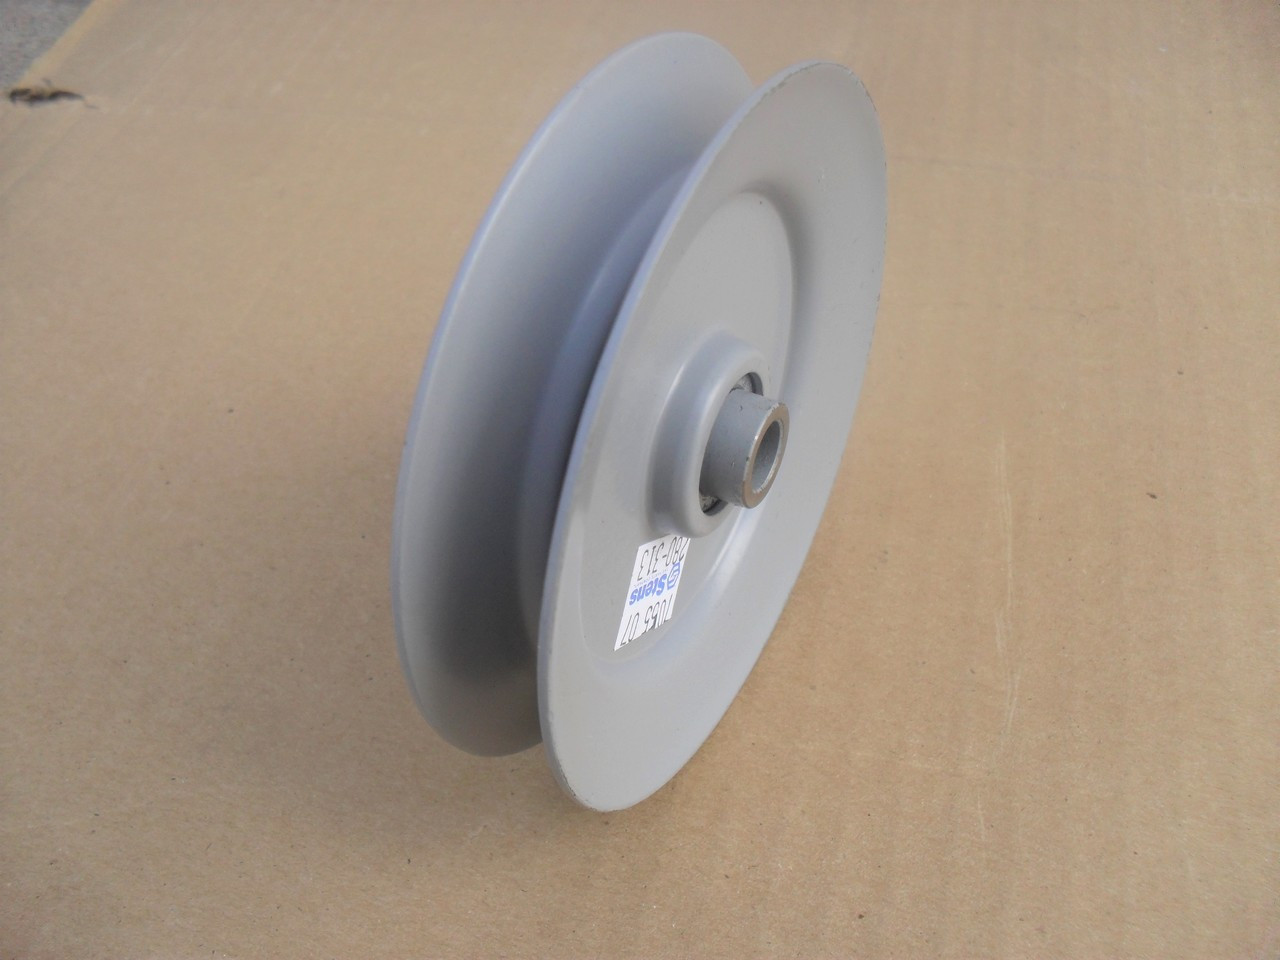 Idler Pulley for Toro 524580, 7451, 957668, 995678, 52-4580, 95-7668, 99-5678 Height 7/8" ID 3/8" OD 4" Made In USA